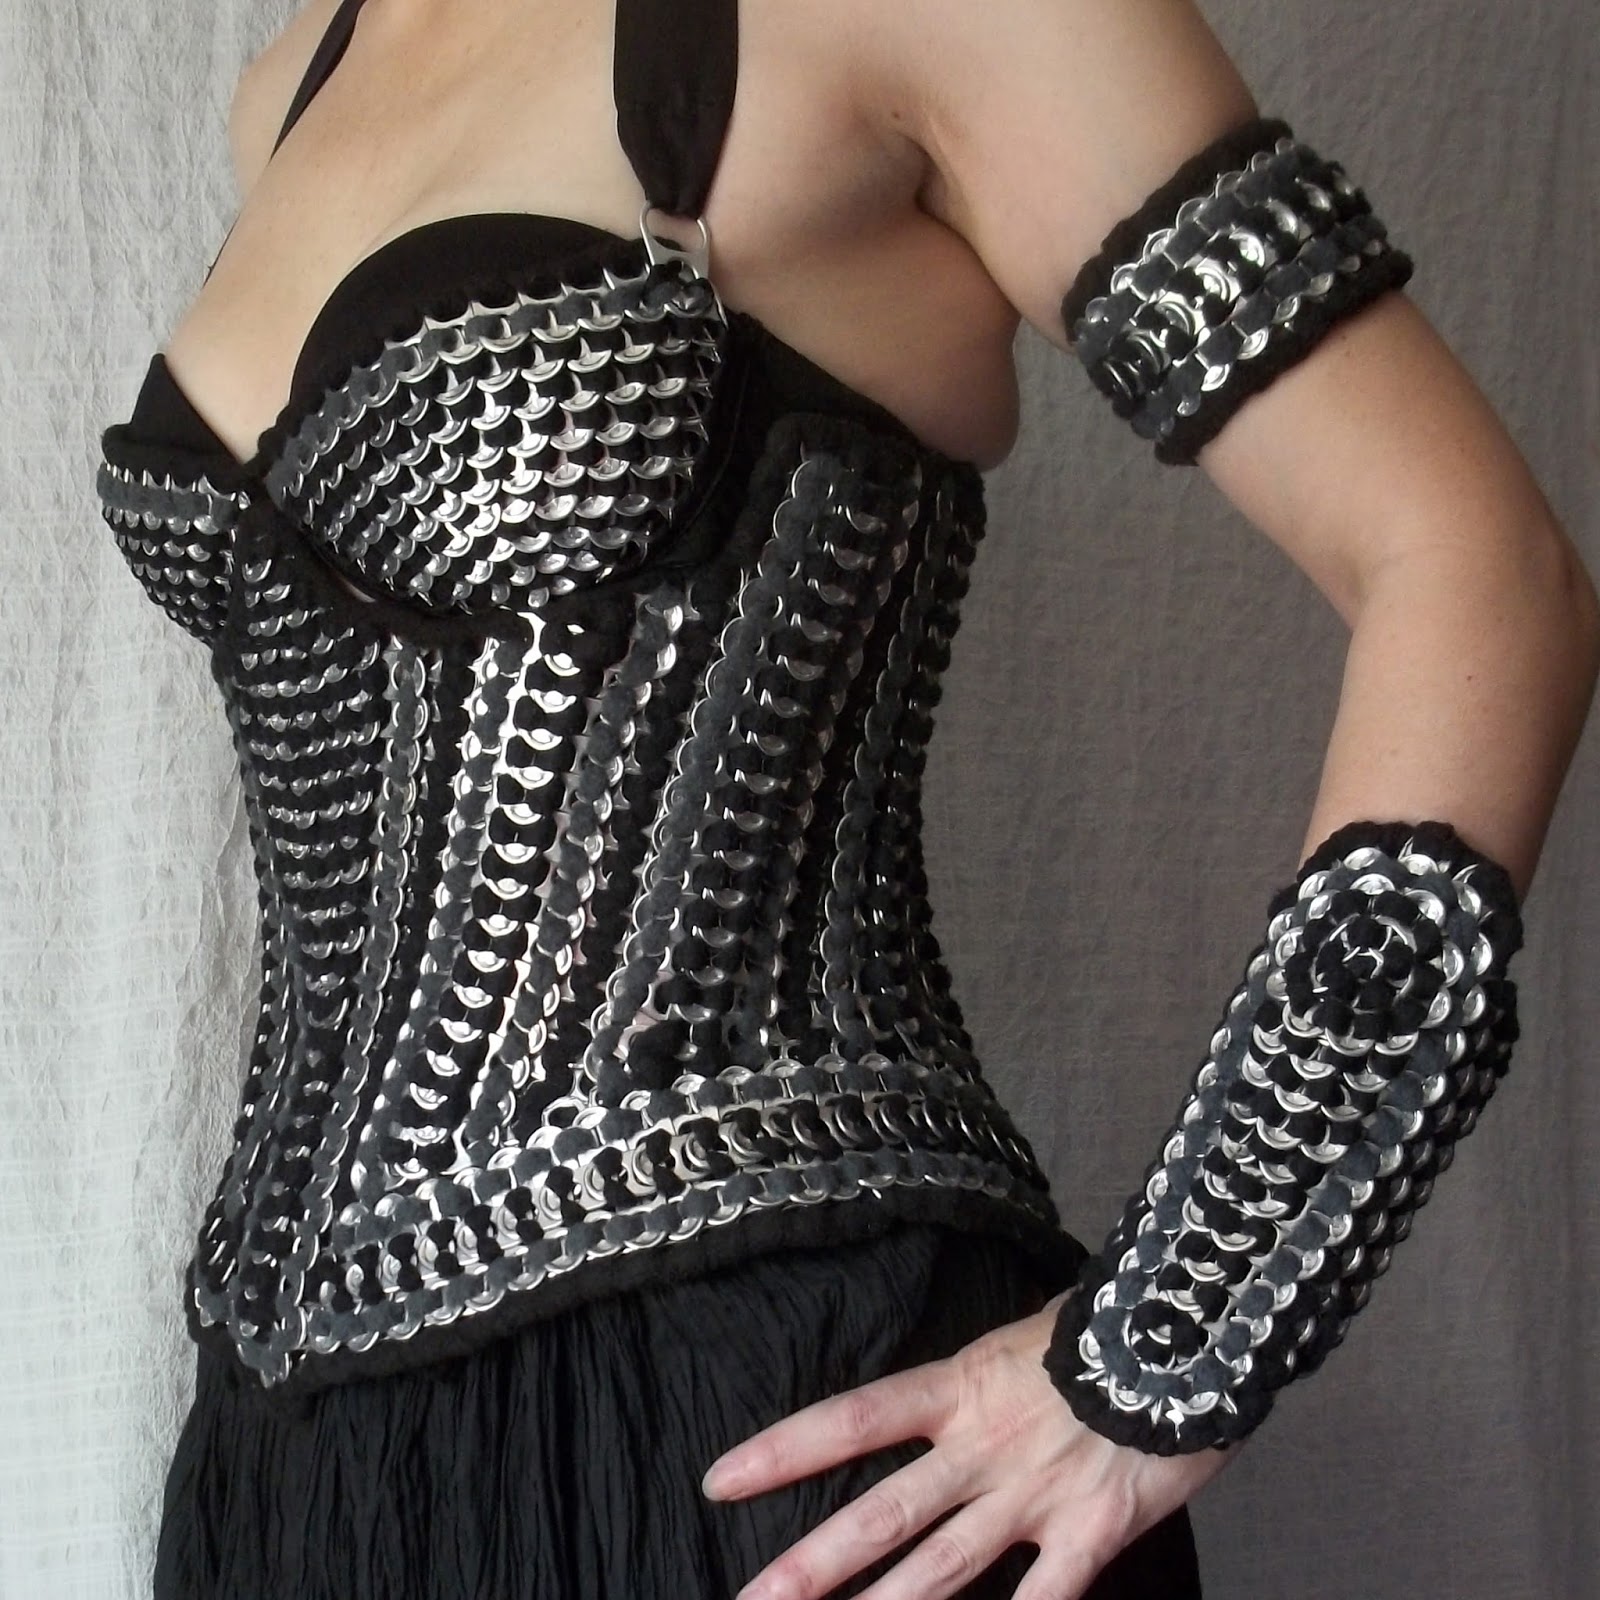 The Art of Can Tabistry: Warrior Woman Tabistry Lamellar Armour